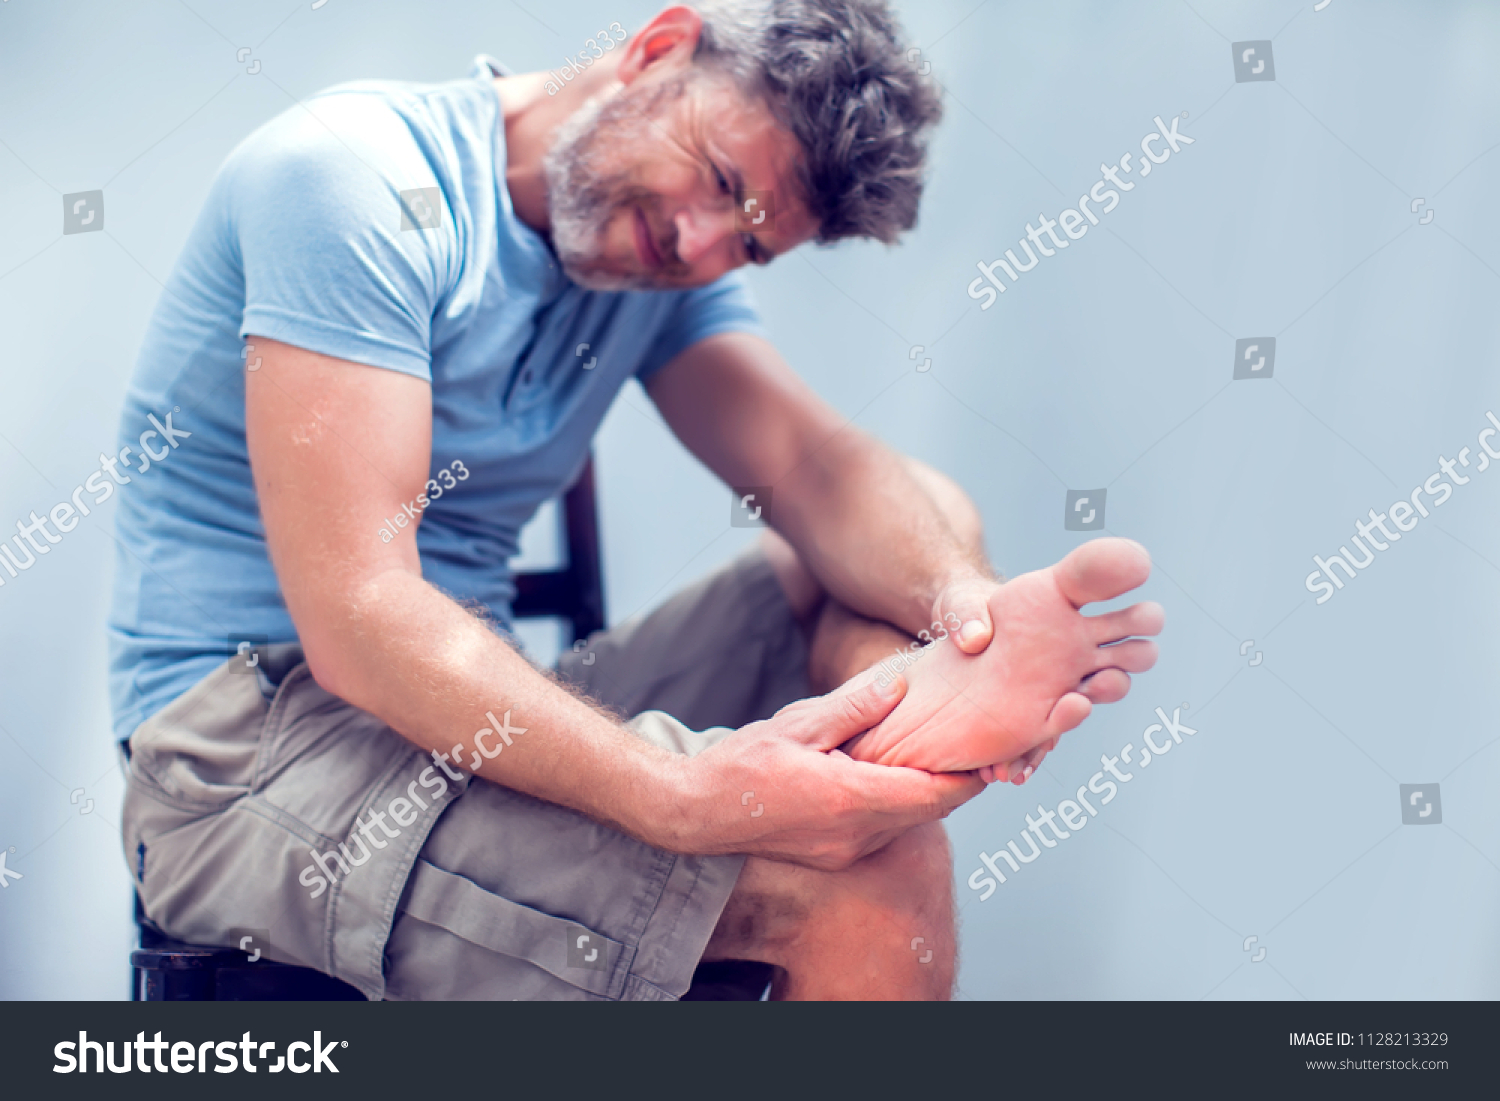 Pain in the foot, man holds hands to his feet, foot massage, cramp, muscular spasm, red accent on the foot, close-up #1128213329